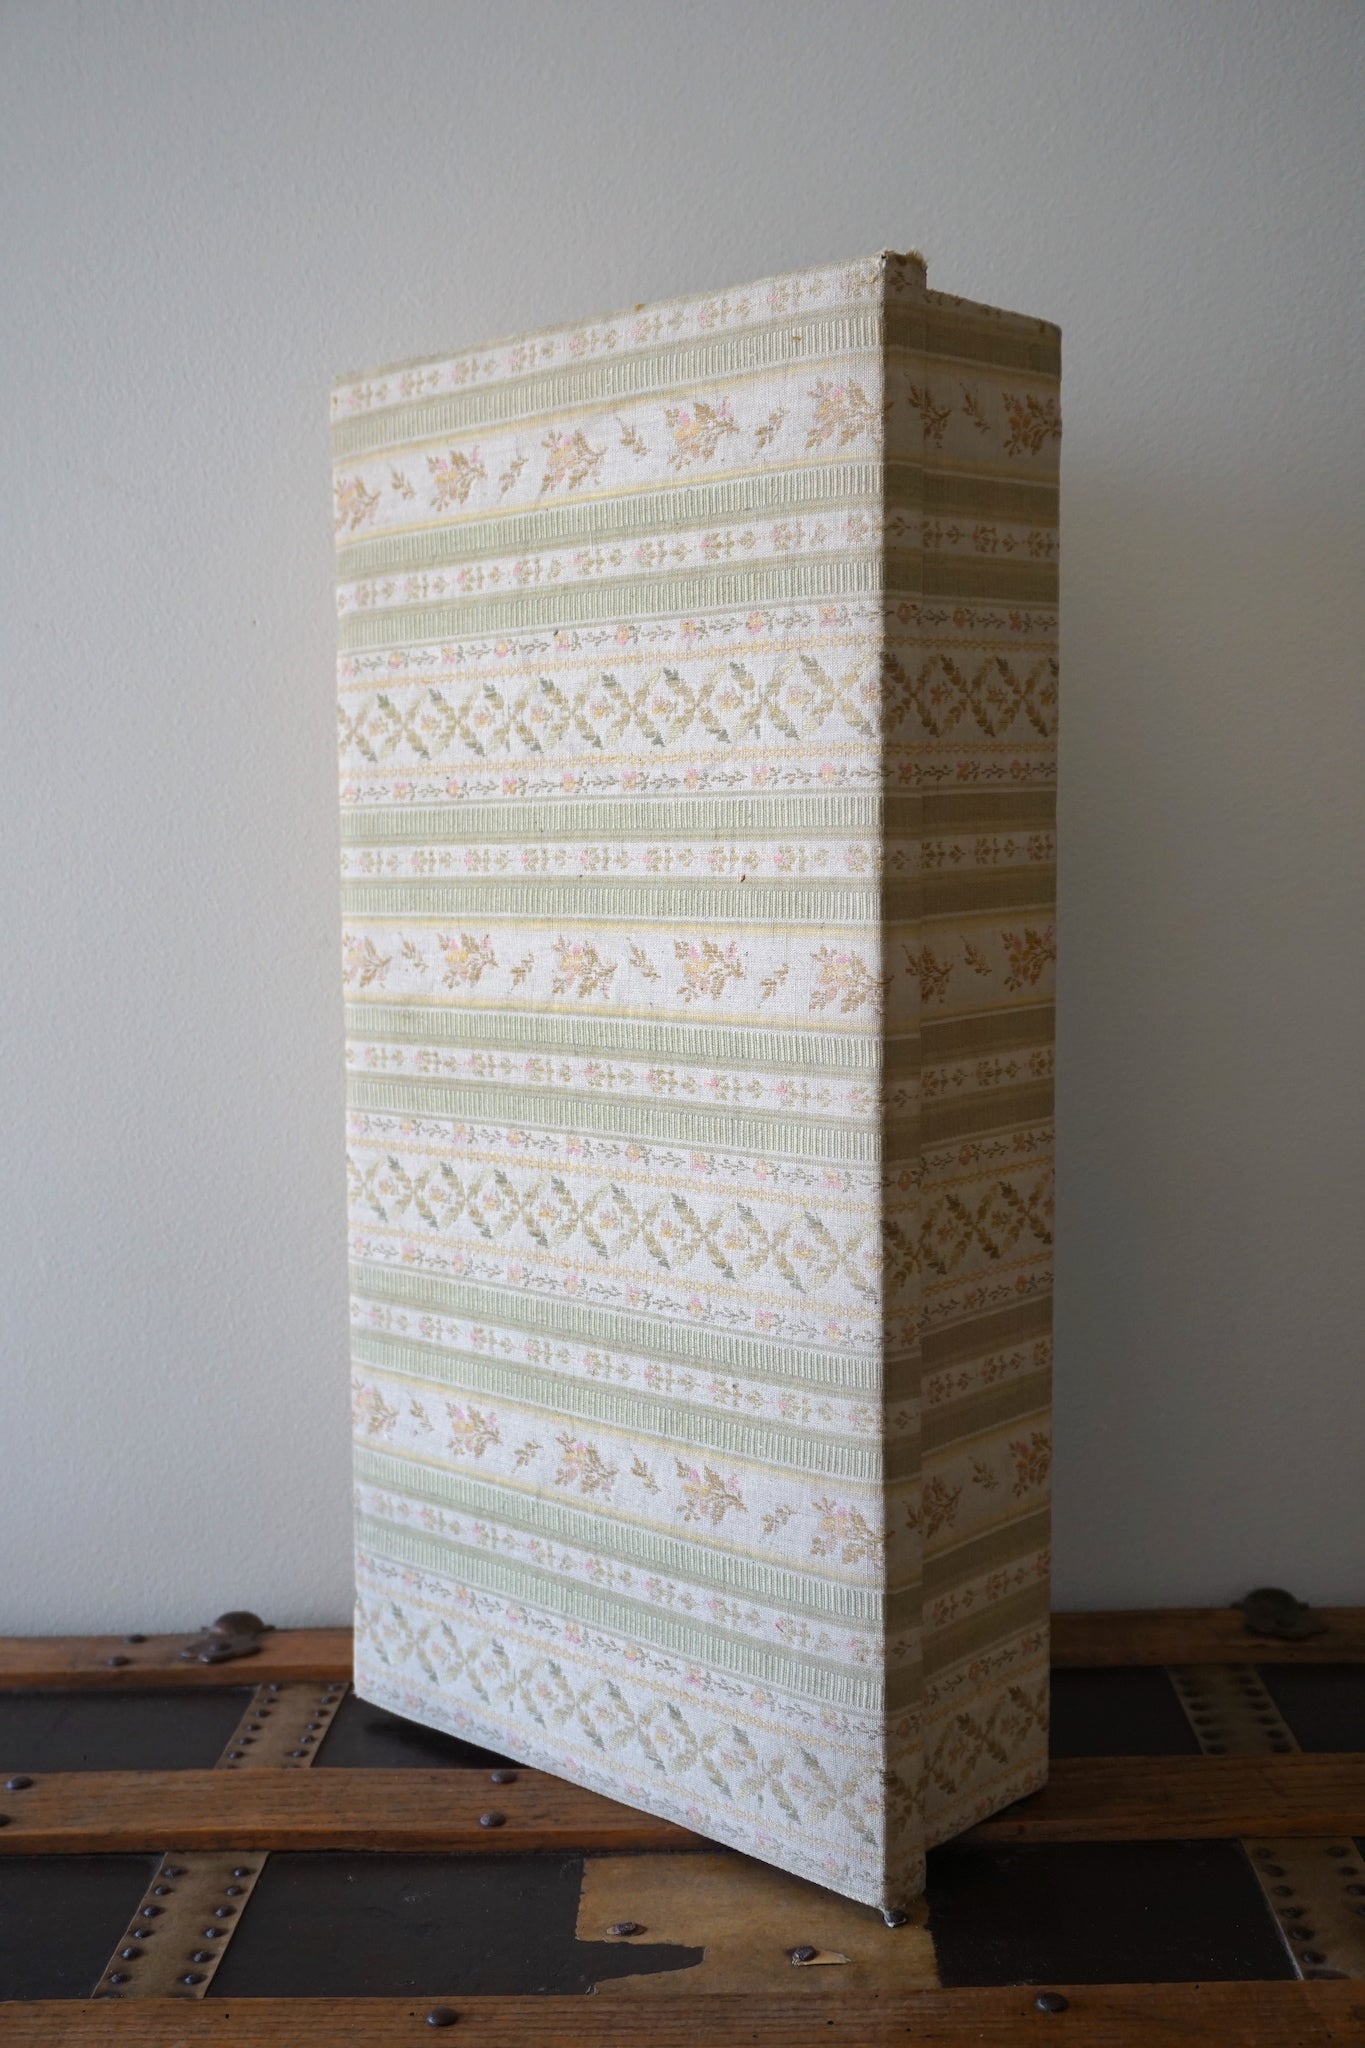 Large Antique French Fabric Covered Boudoir Box